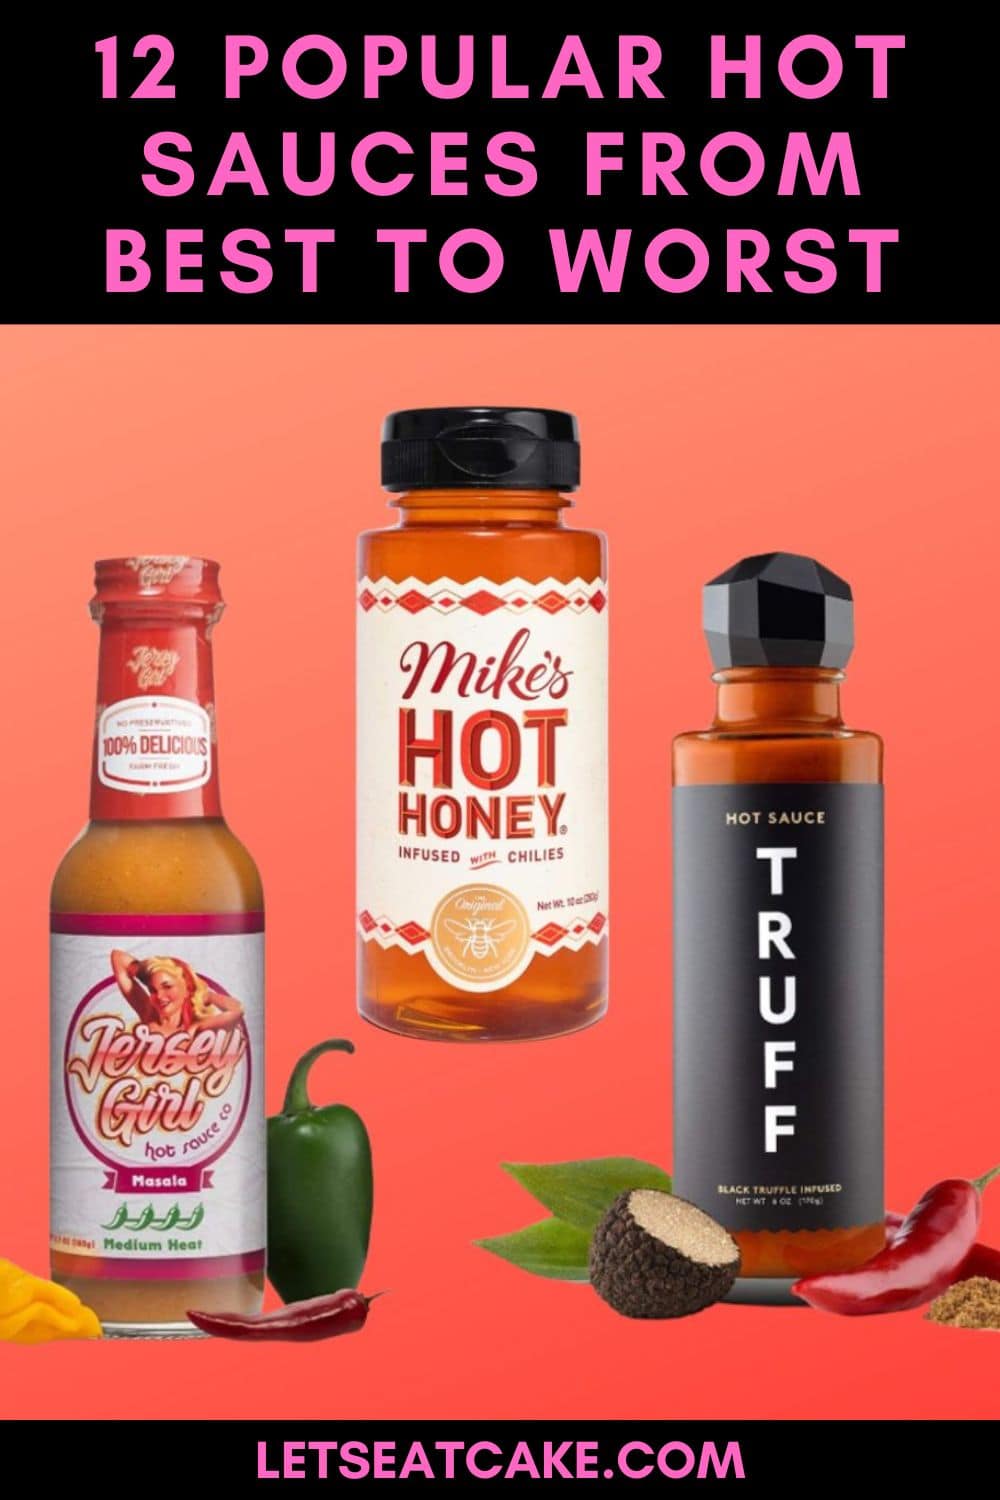 12 Popular Hot Sauce Brands Ranked From Best To Worst Lets Eat Cake 